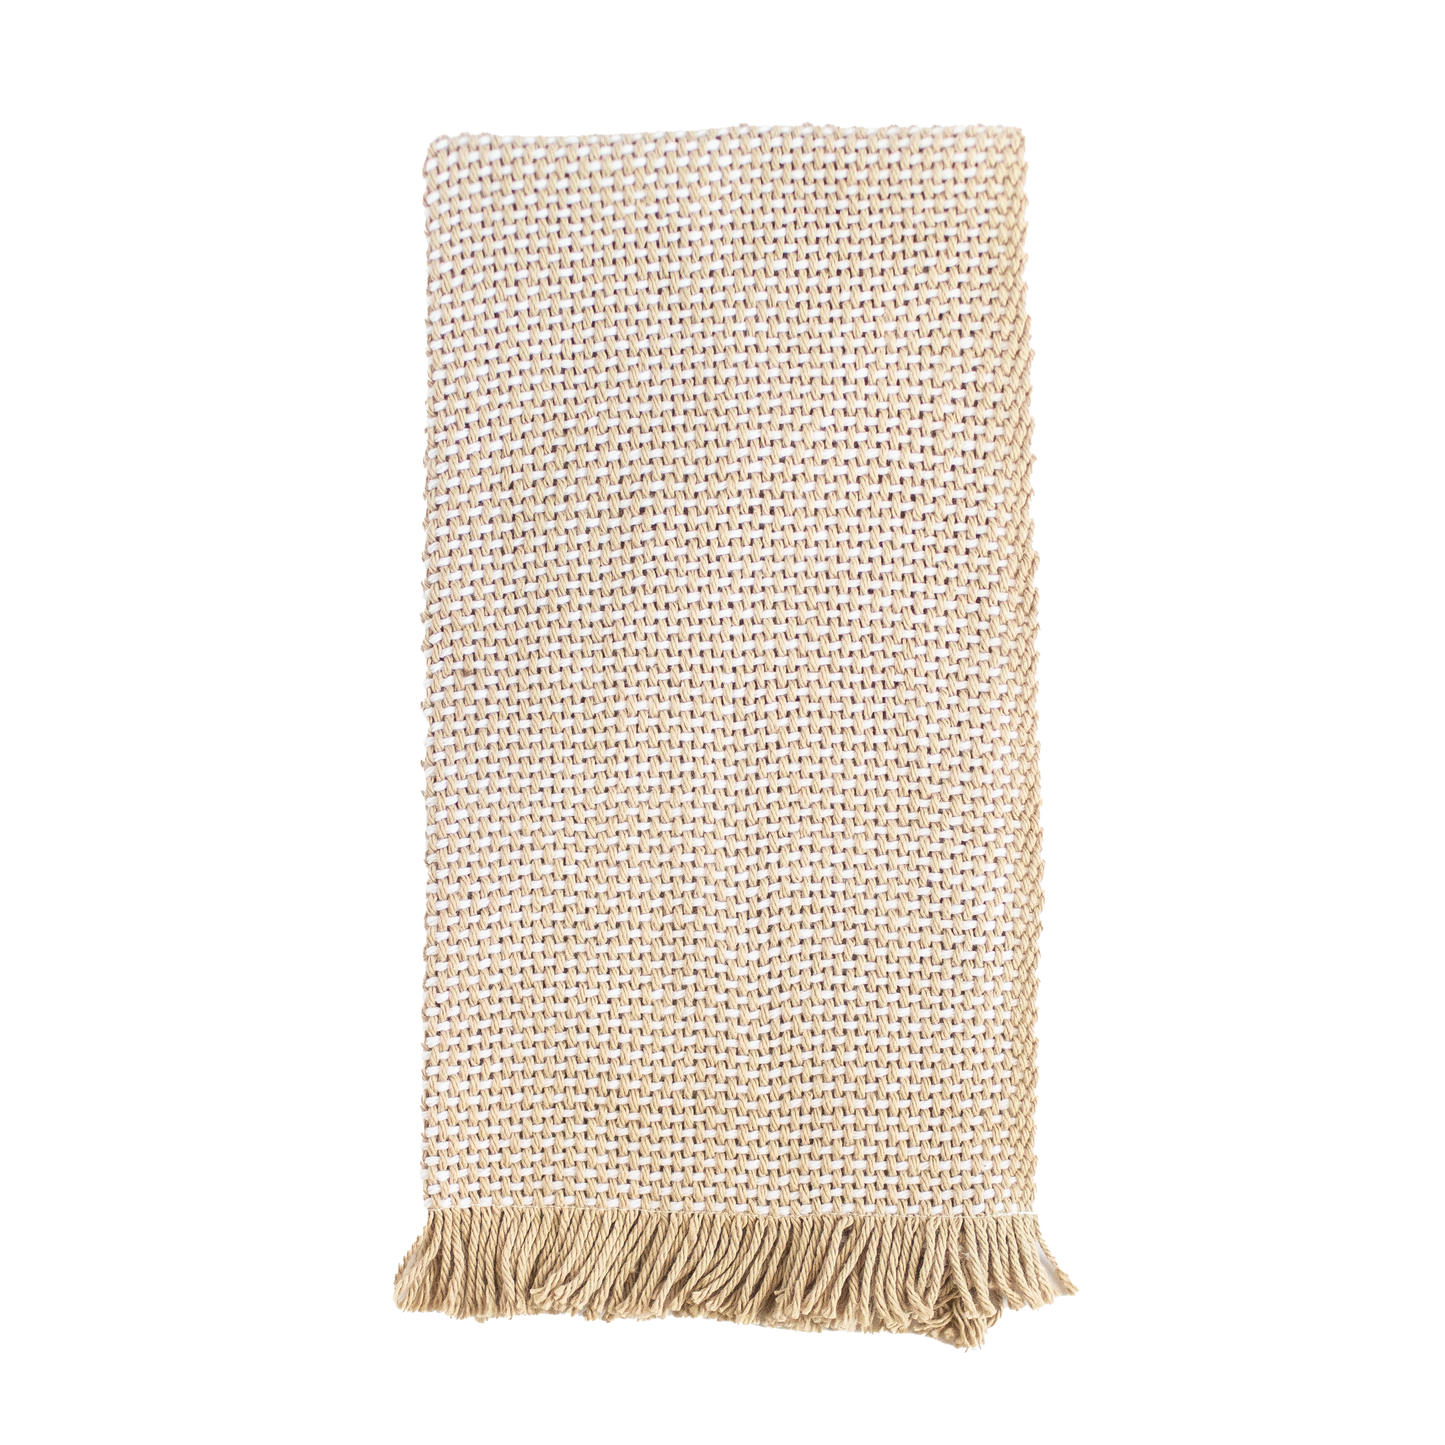 Folded tan and white hand towel